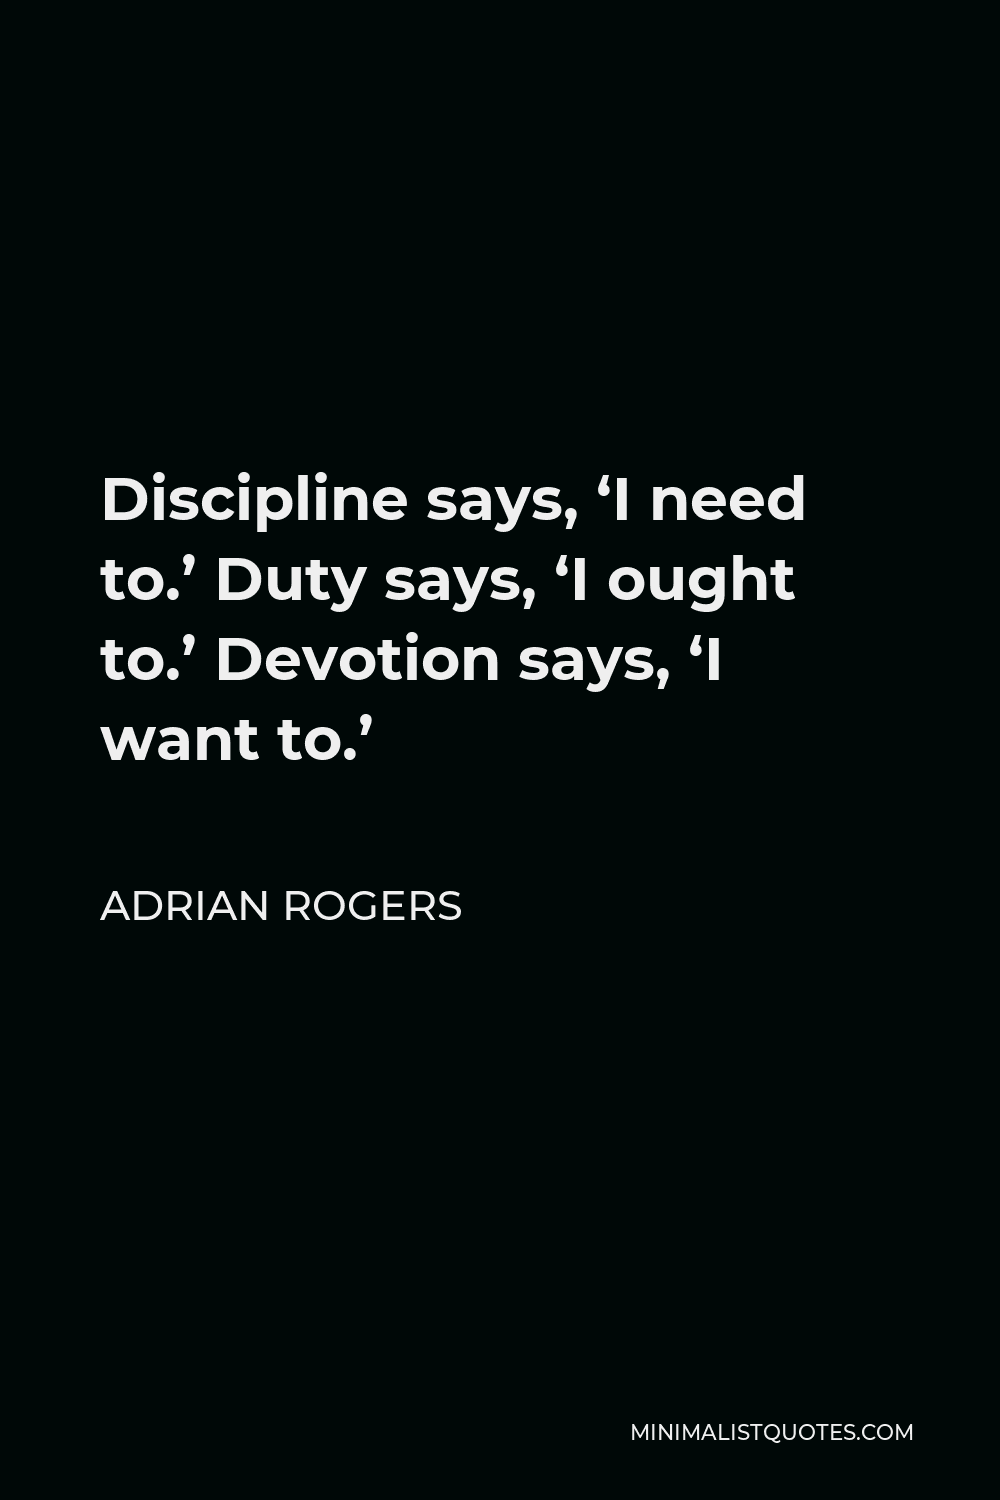 Adrian Rogers Quote - Discipline says, ‘I need to.’ Duty says, ‘I ought to.’ Devotion says, ‘I want to.’